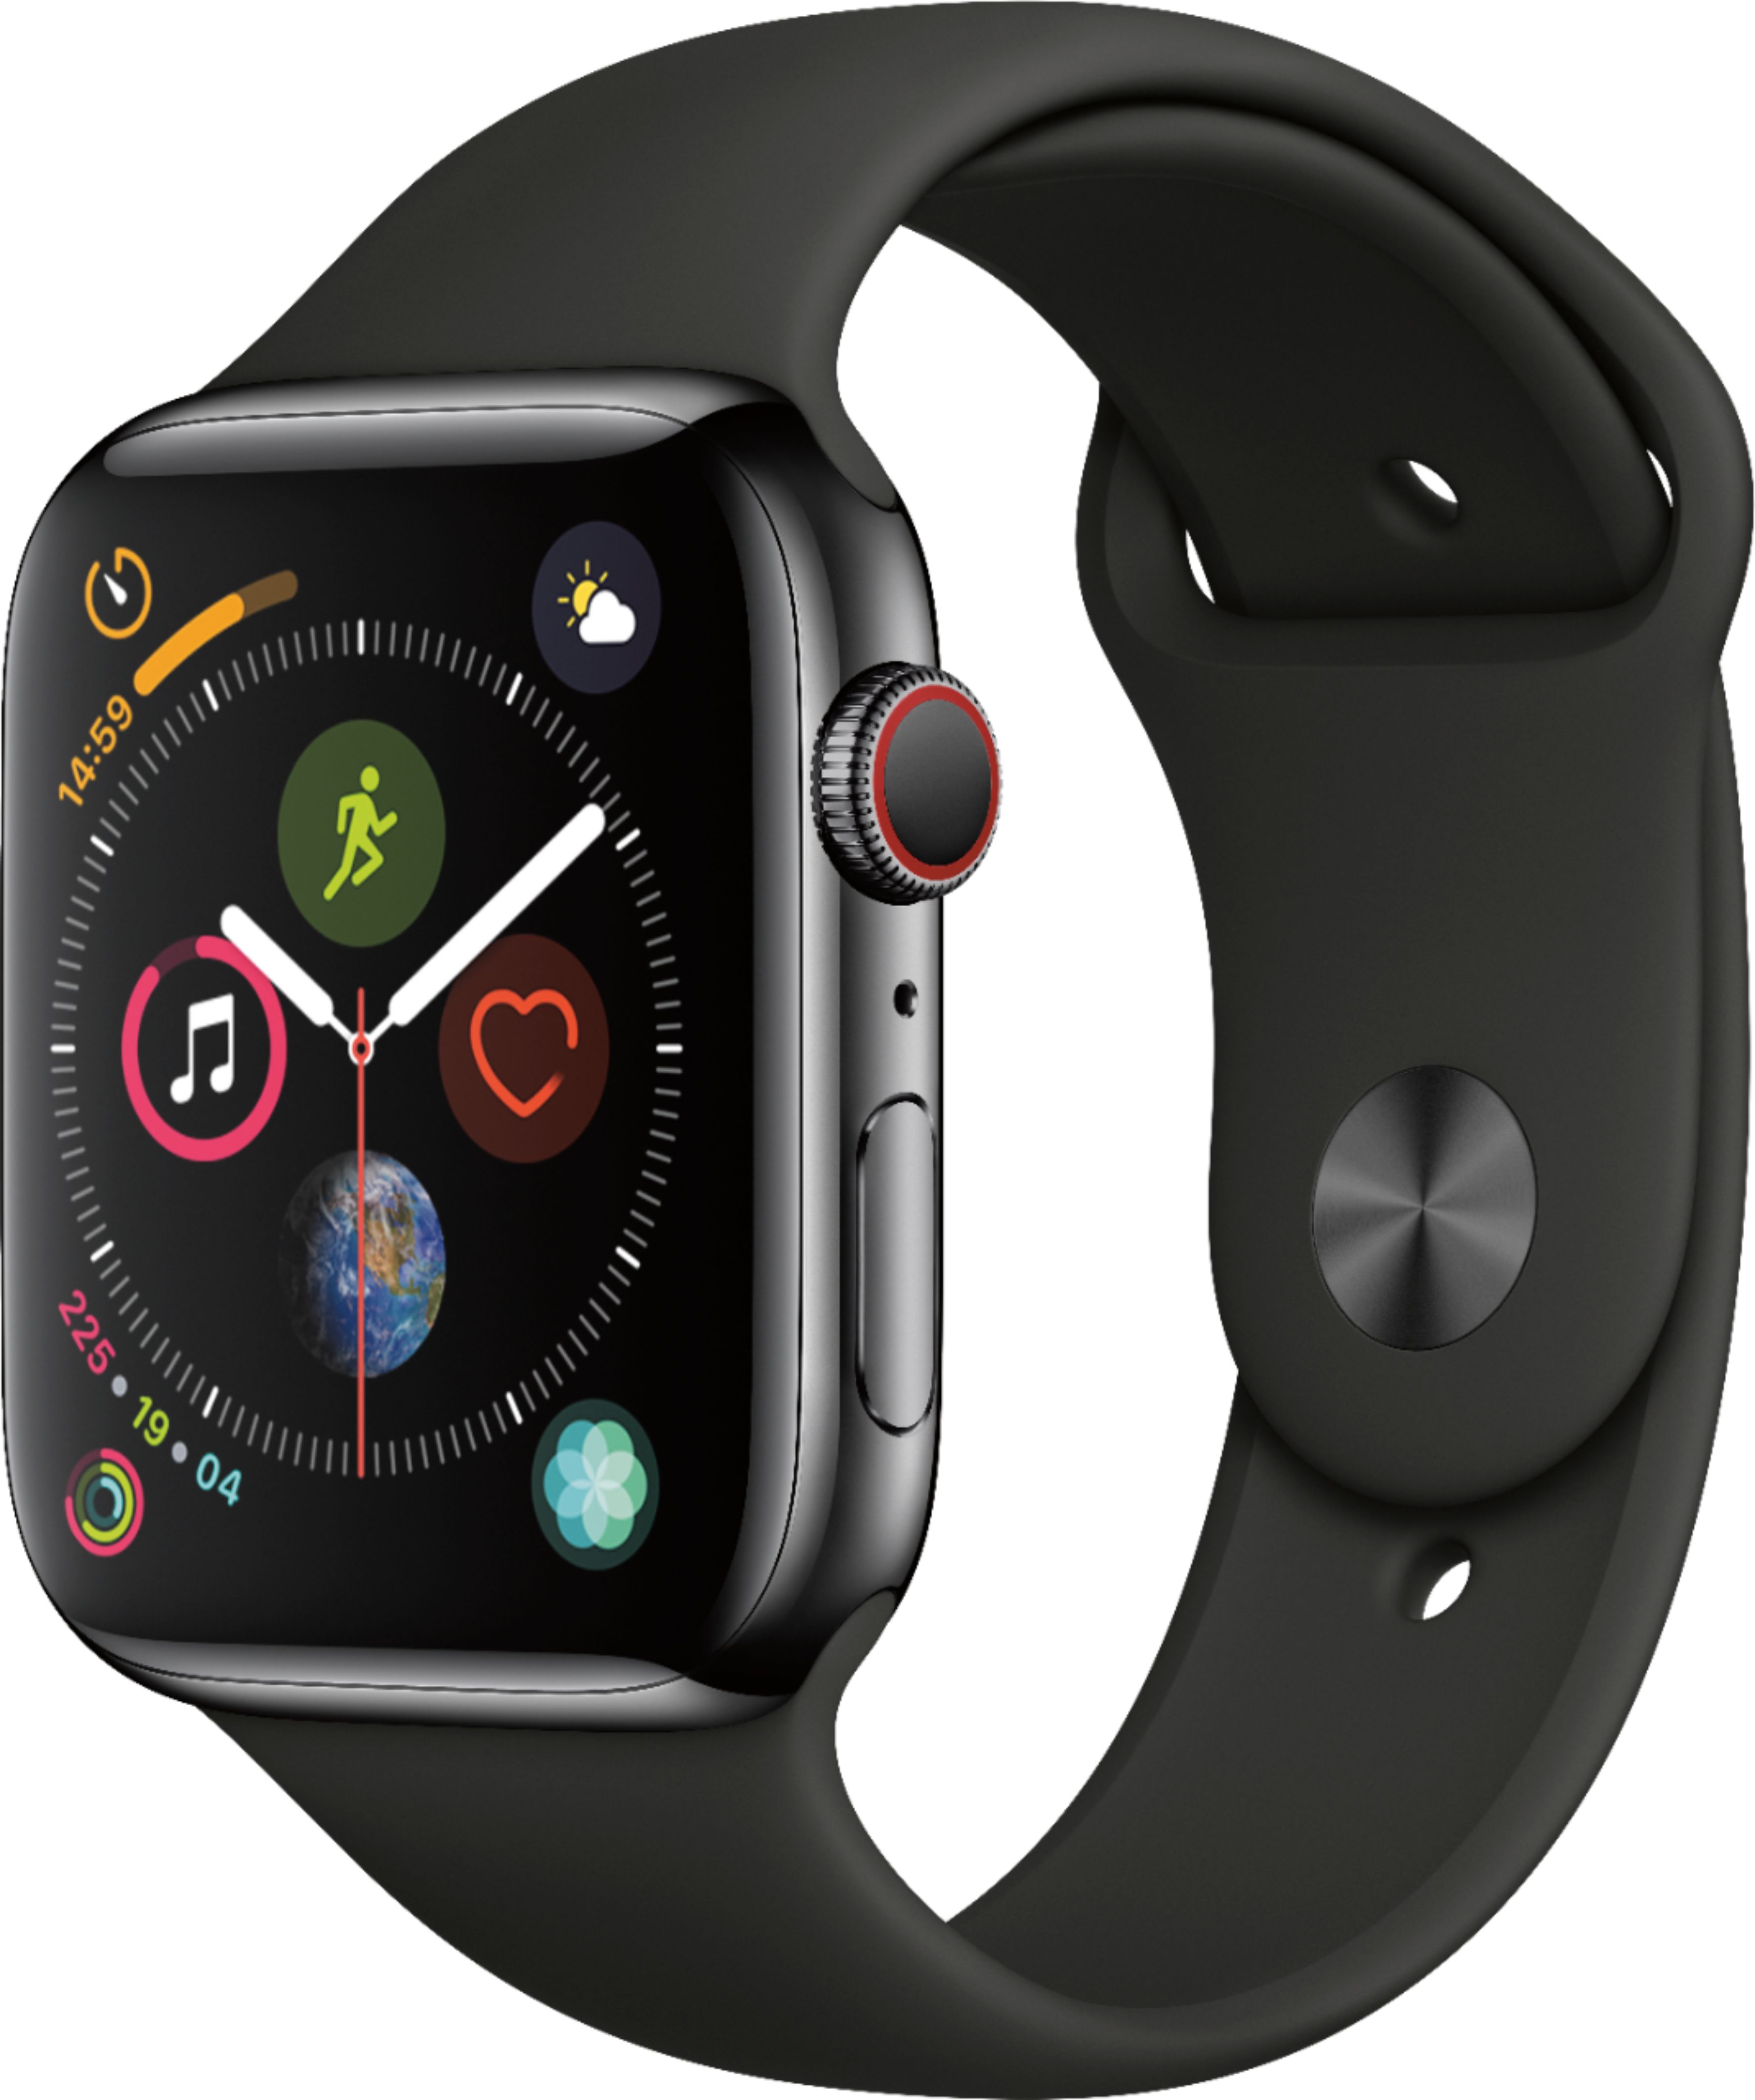 Angle View: Geek Squad Certified Refurbished Apple Watch Series 4 (GPS + Cellular) 44mm Stainless Steel Case with Black Sport Band - Space Black Stainless Steel